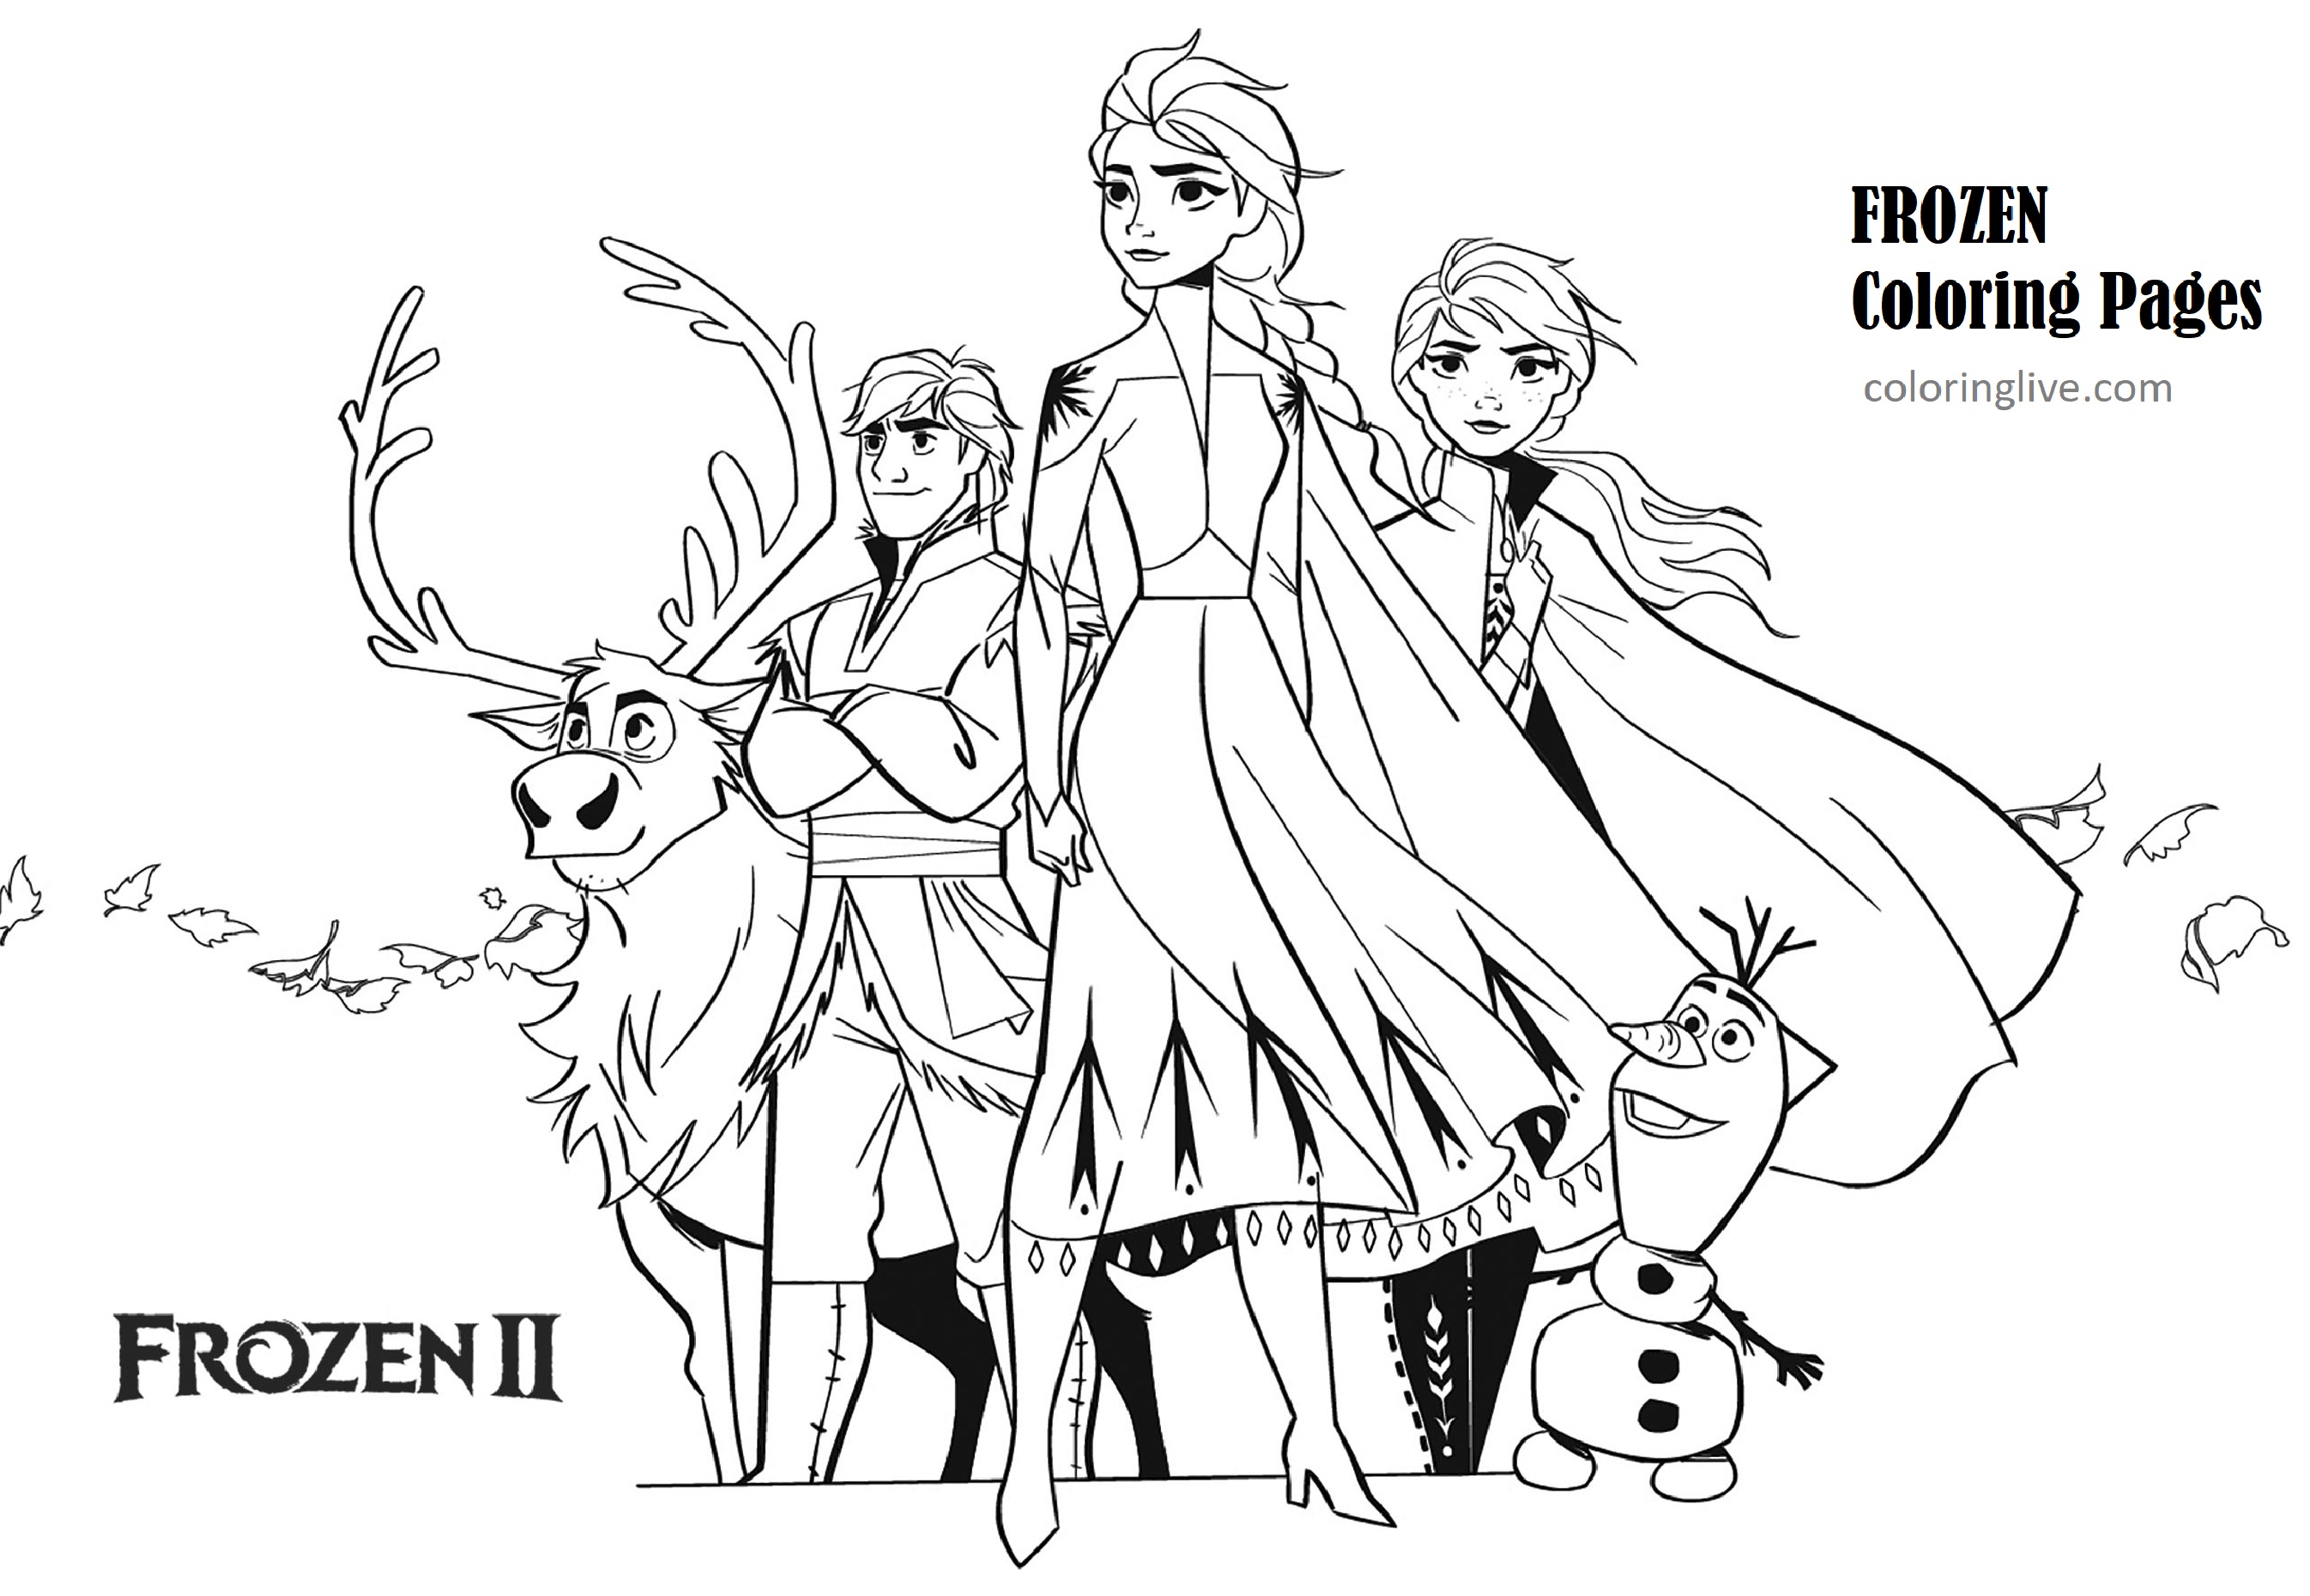 Printable Incredible Frozen 2 Cover Coloring Page for kids.